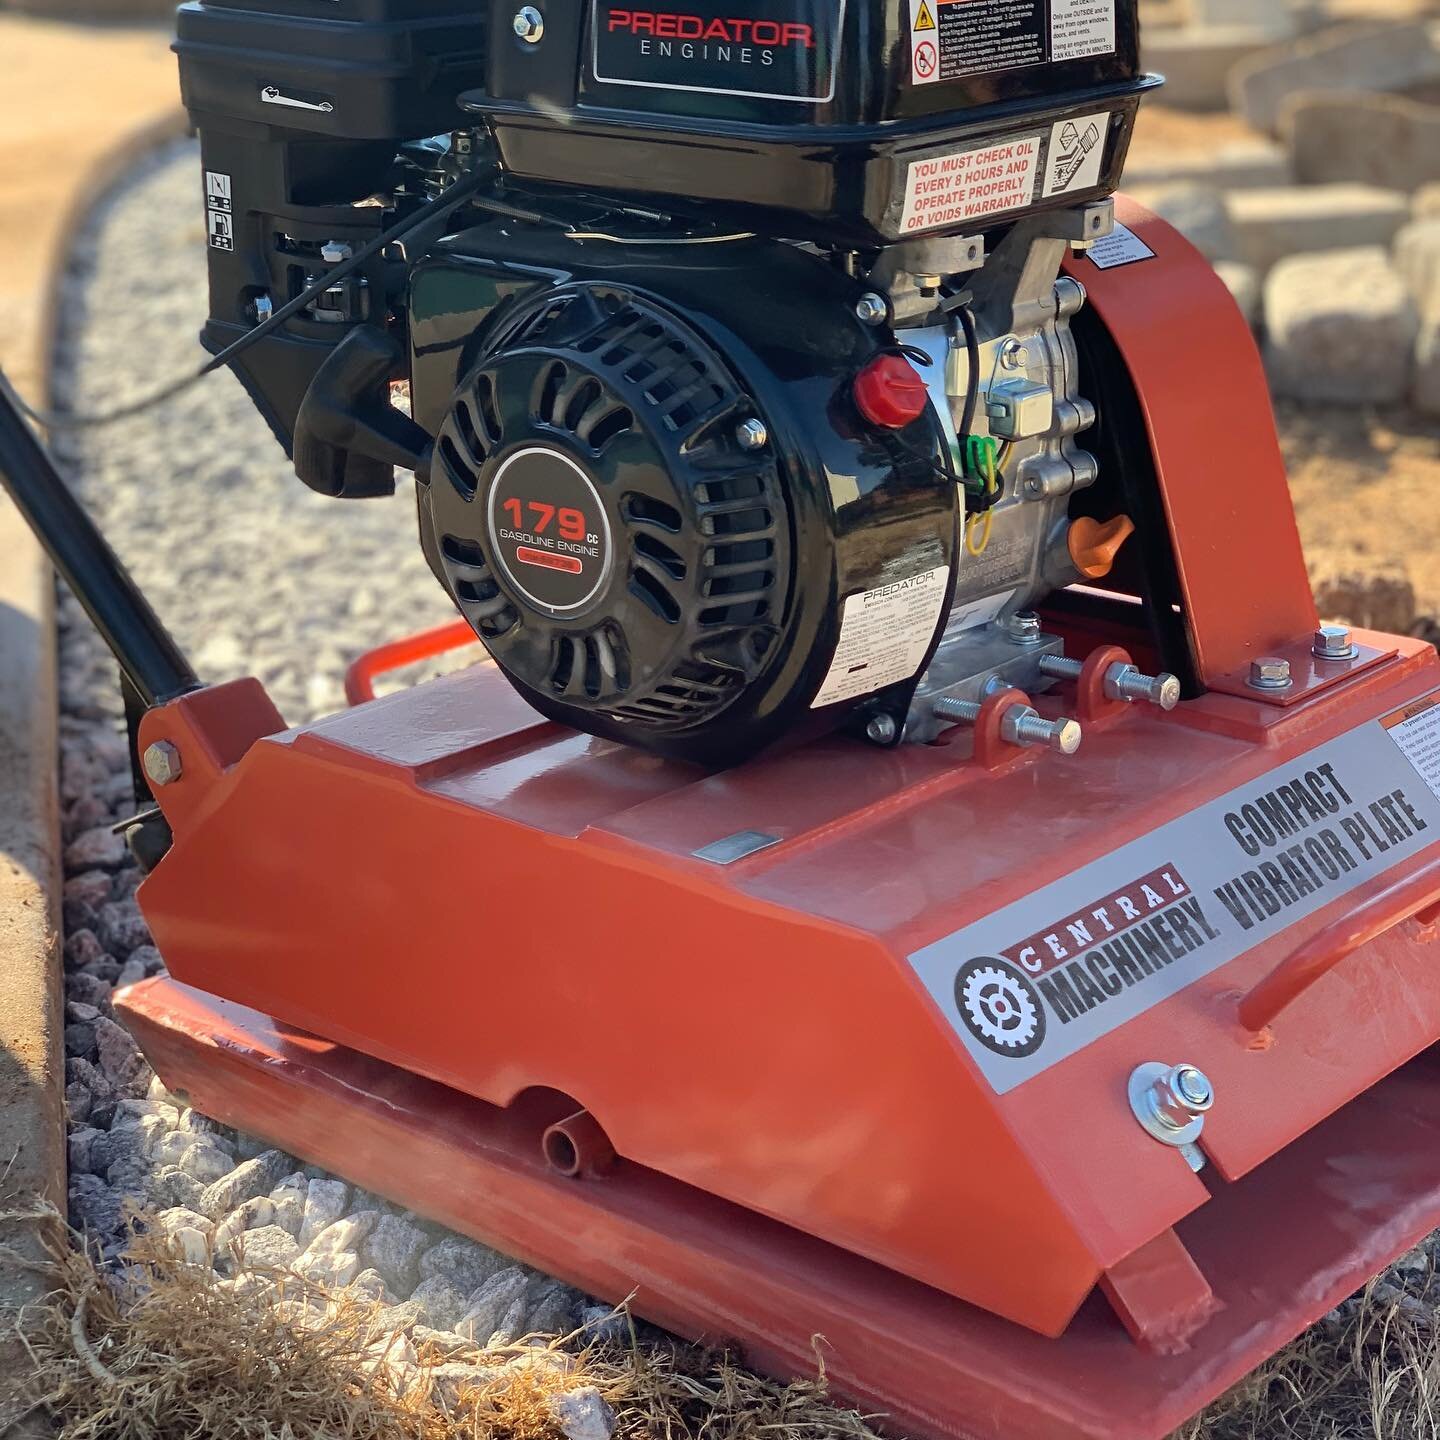 EQUIPMENT:

This plate compactor is the newest addition to the equipment family! It runs great and provides the high compact rates we need for hardscape installs!